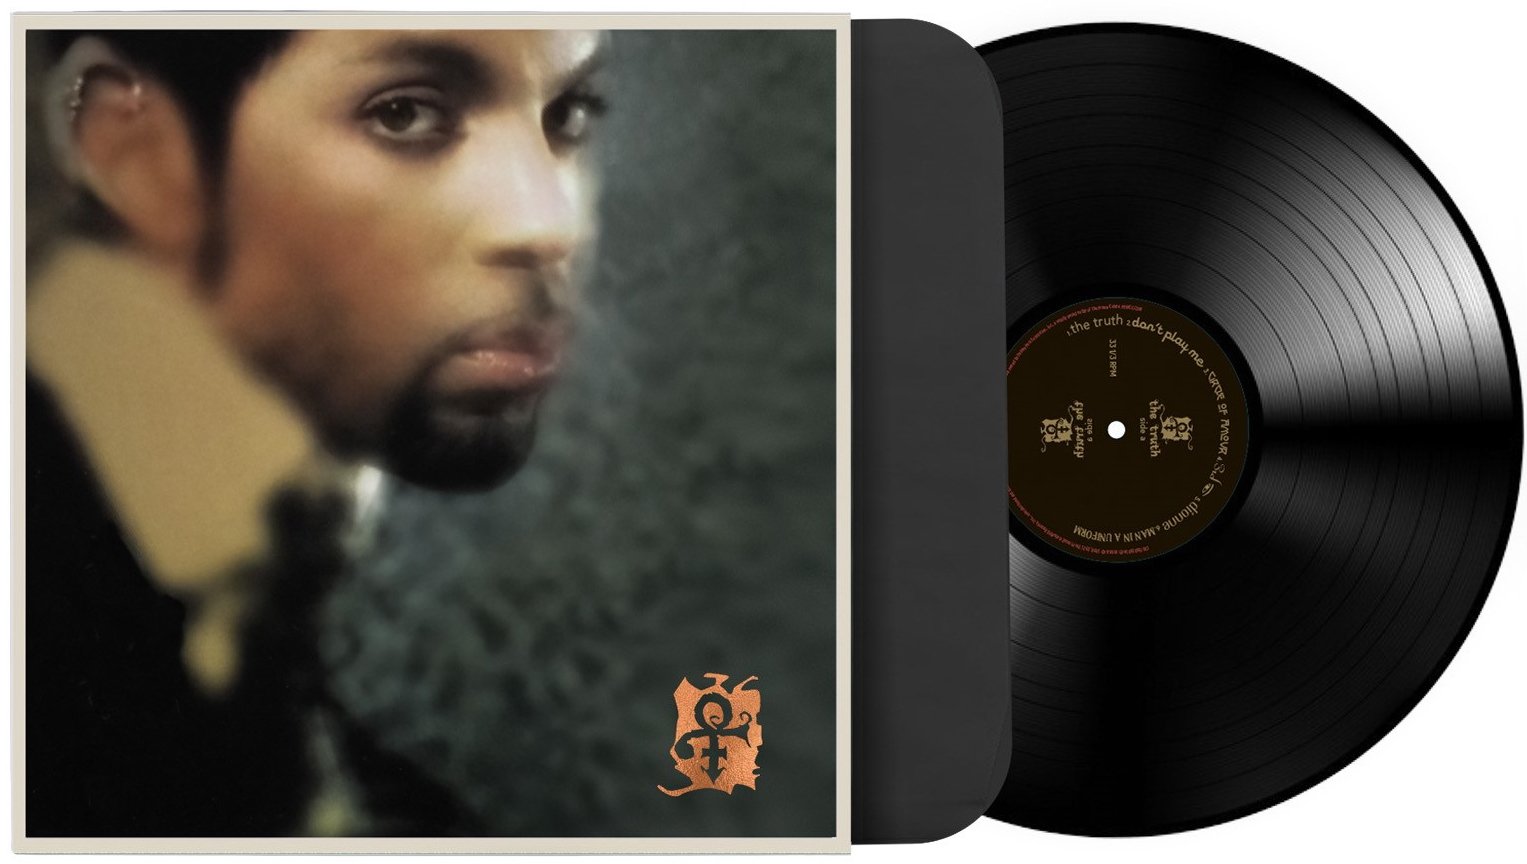 Prince&#8217;s &#8216;The Truth&#8217; &#038; &#8216;The Gold Experience&#8217; On Black Vinyl Out Now